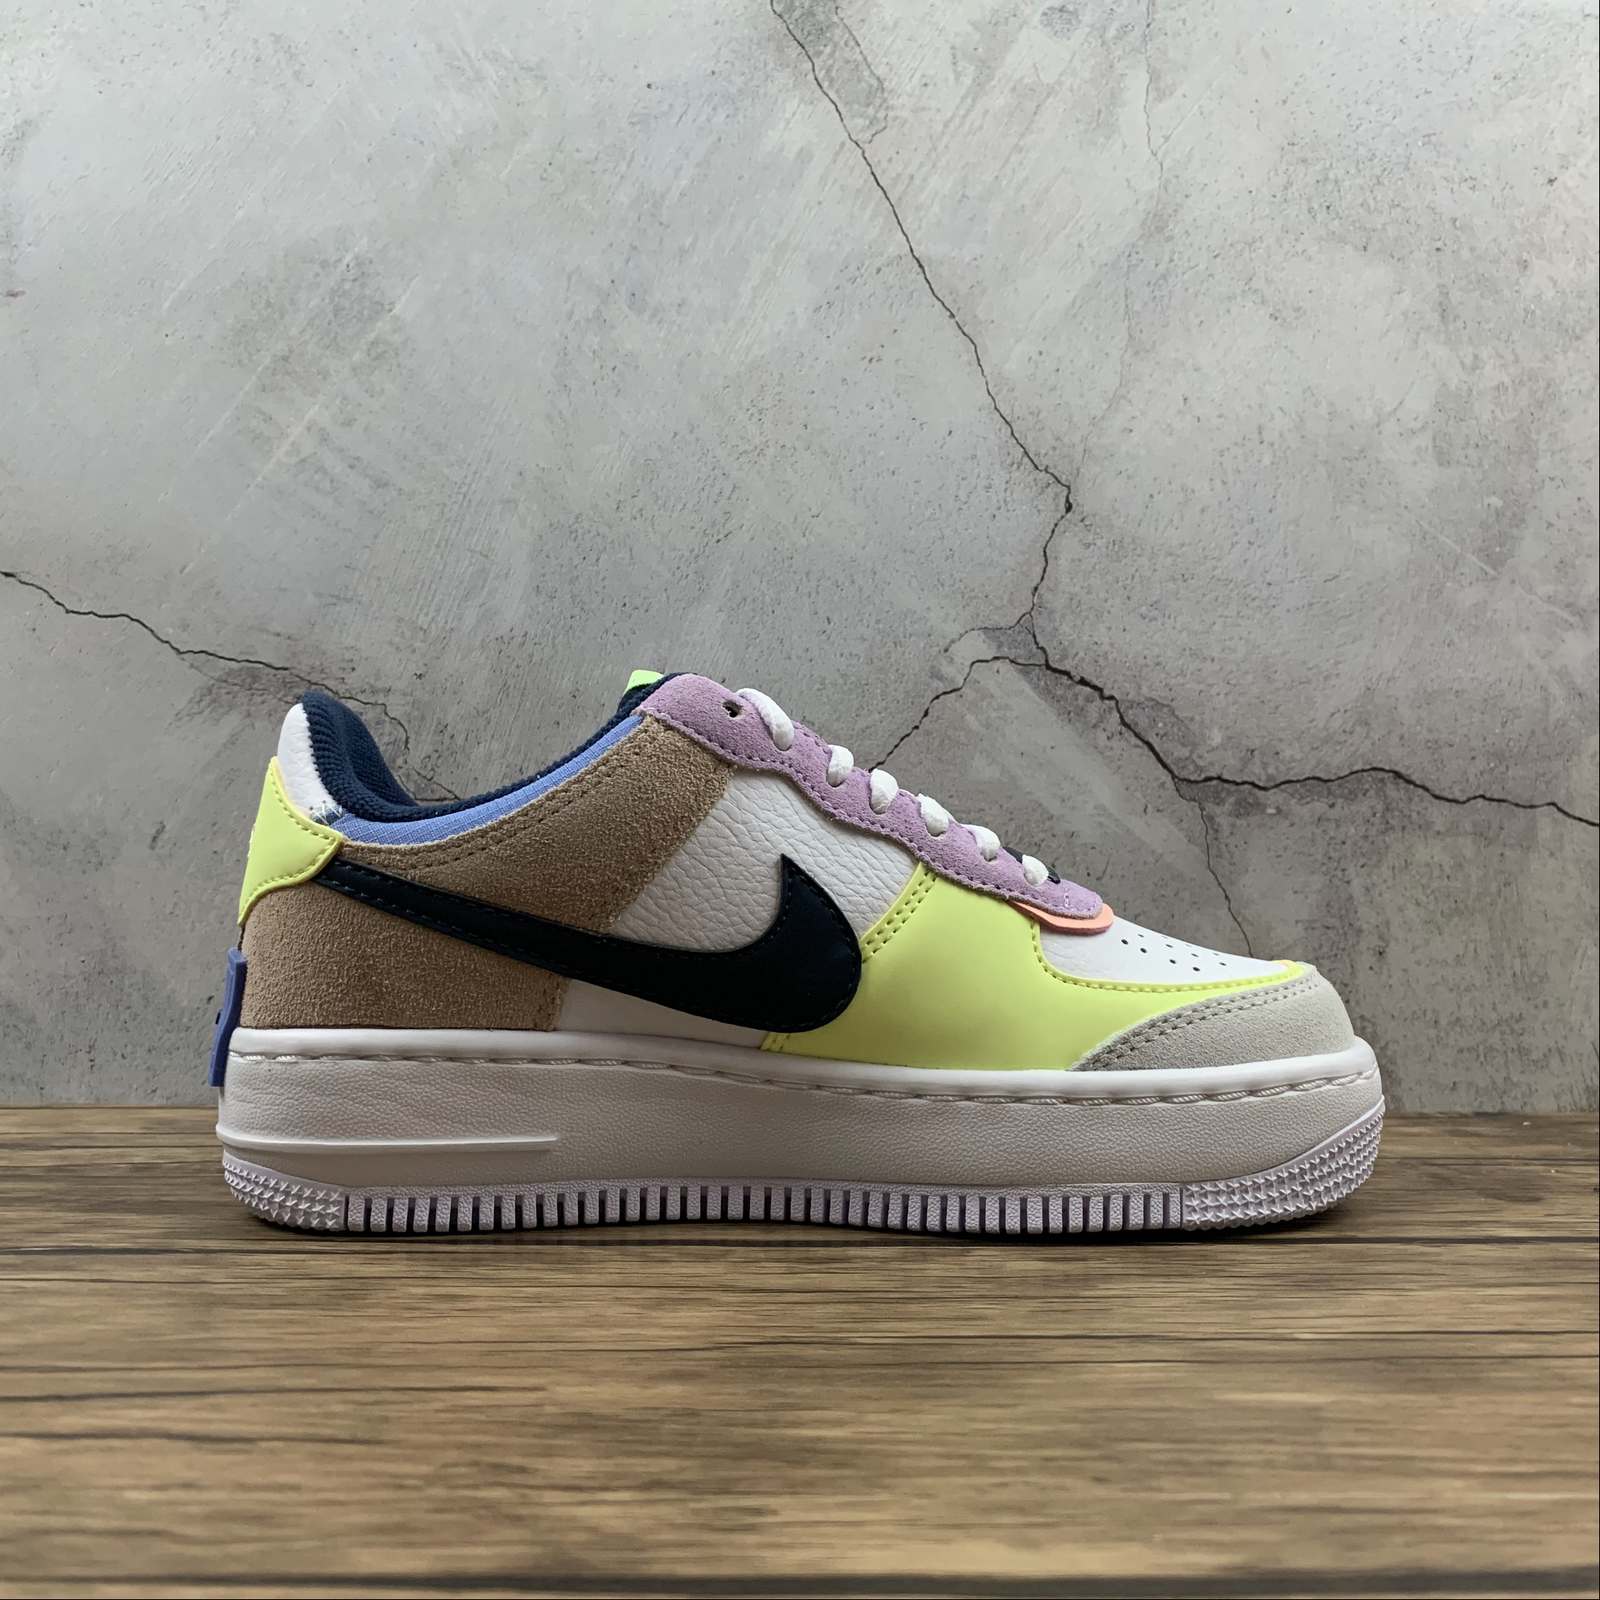 Nike Air Force 1 Shadow Photon Dust/Royal Pulse/Barely Volt For Sale